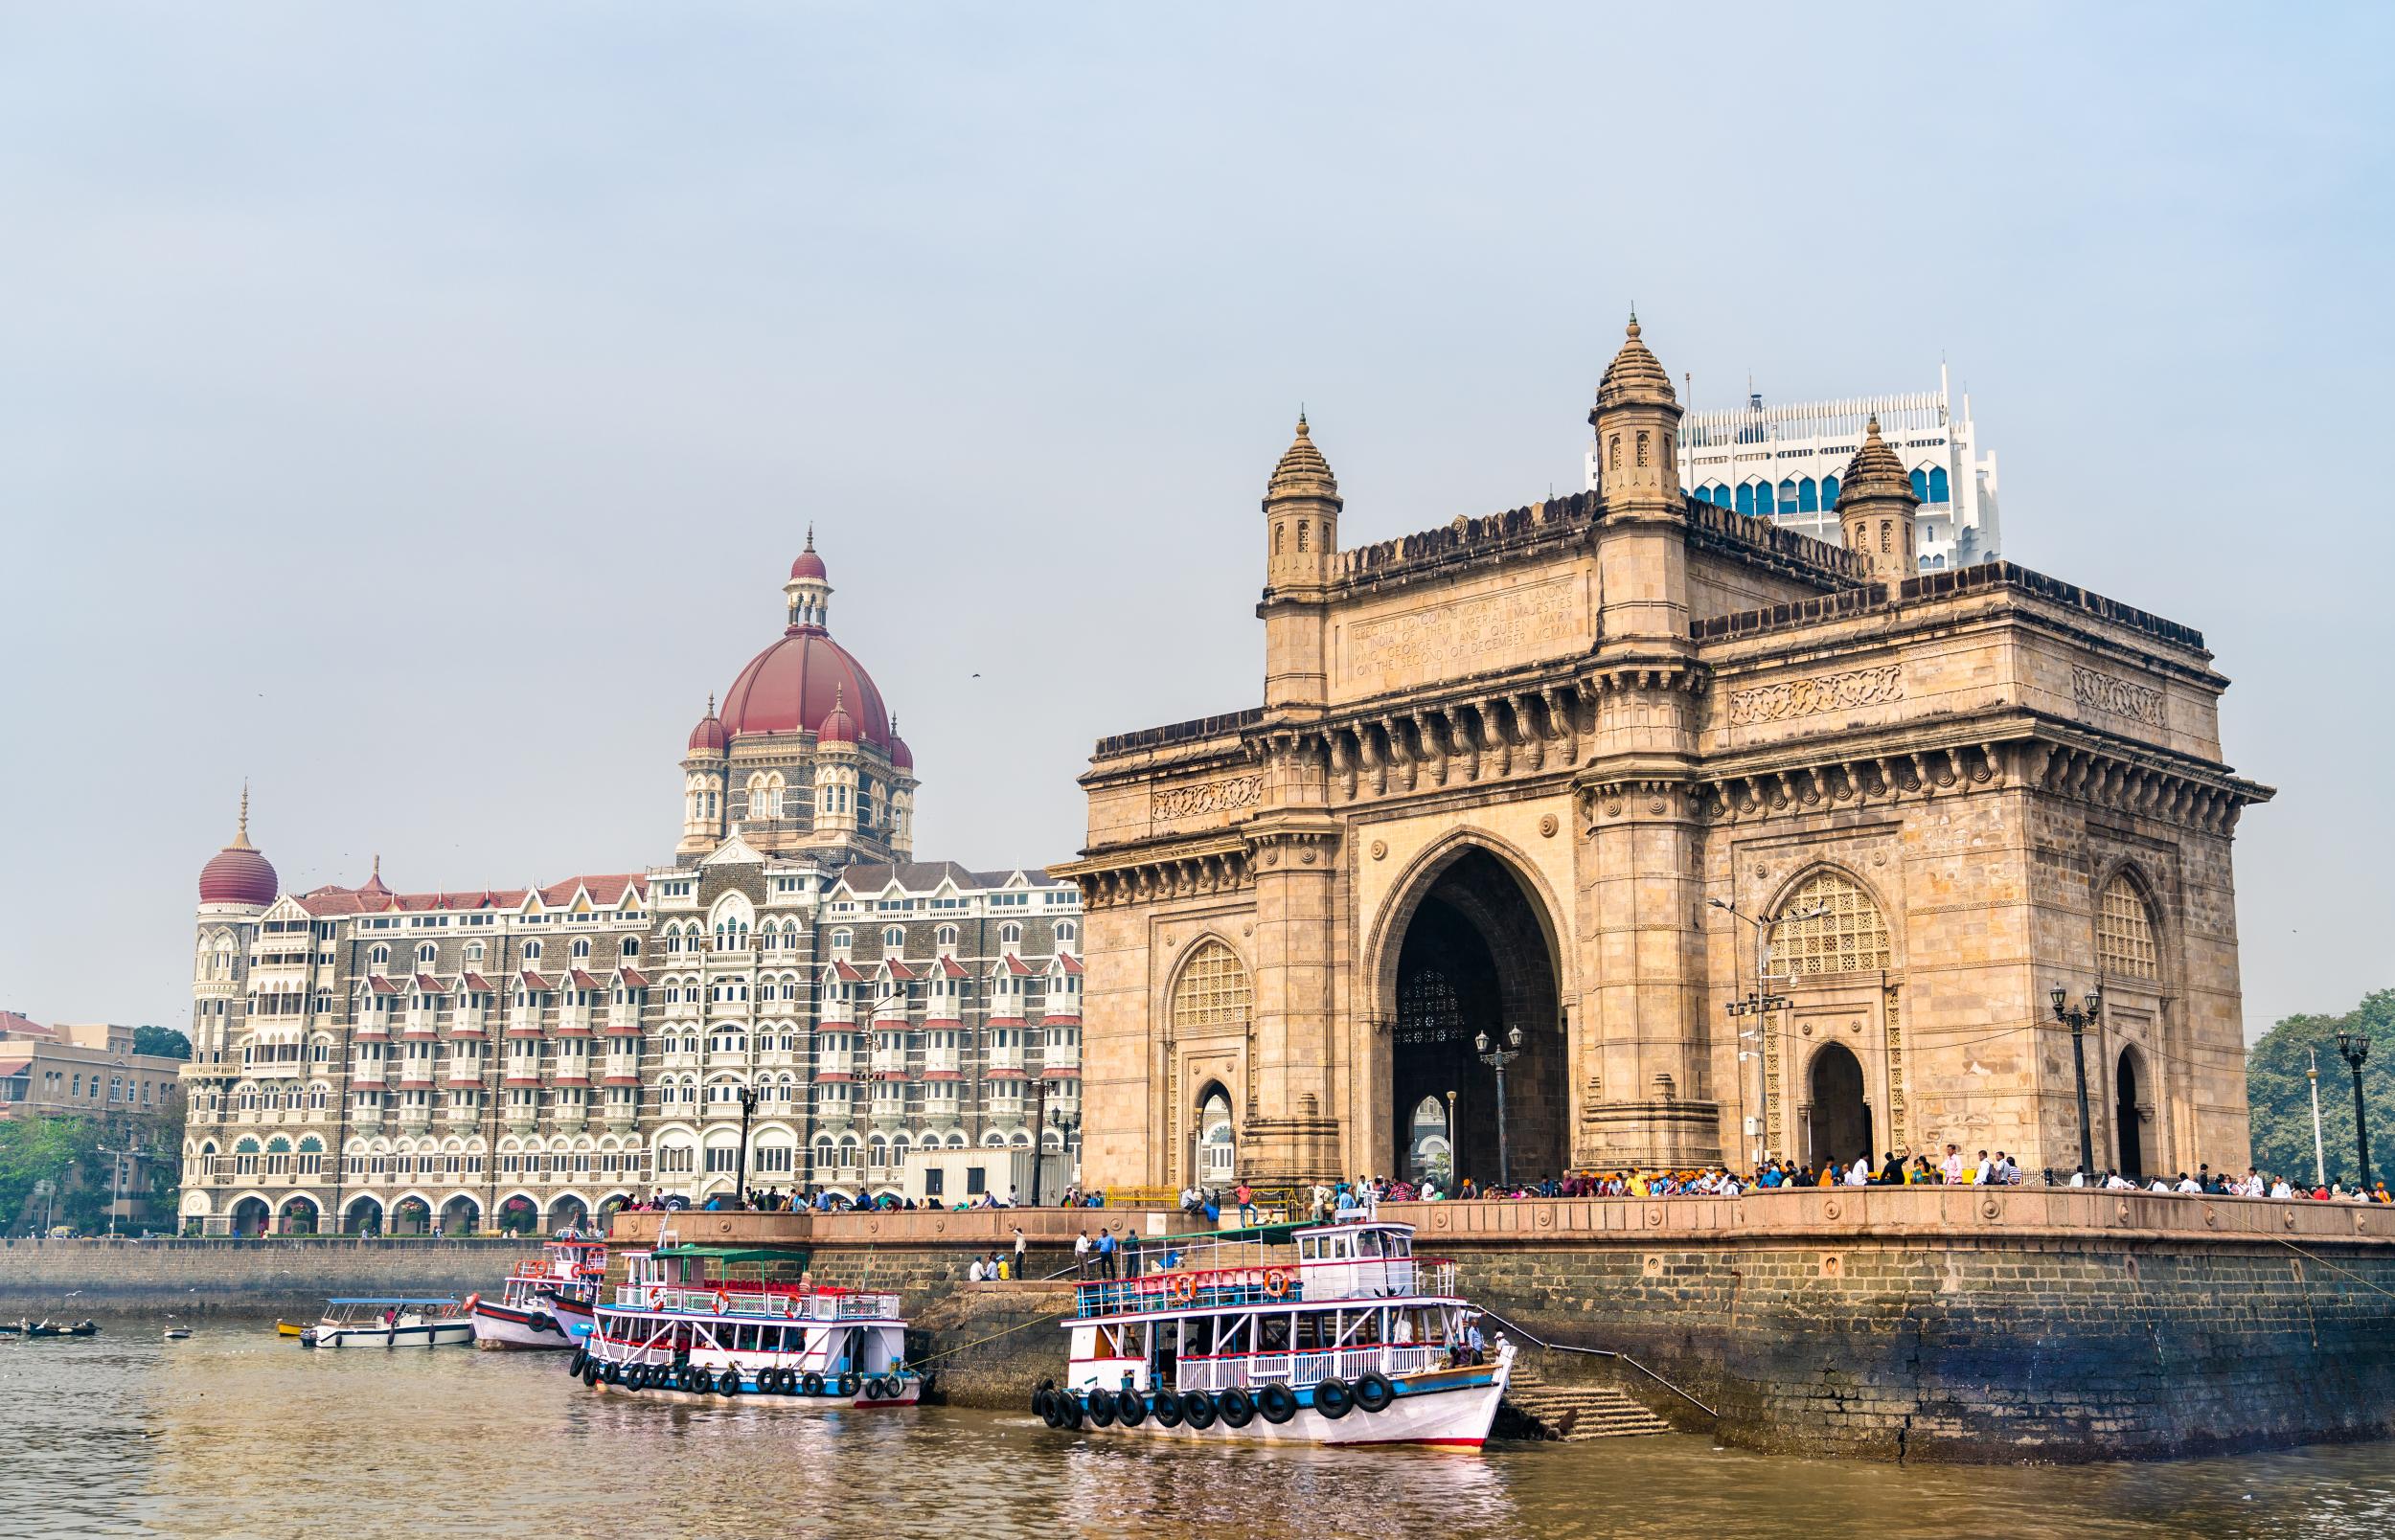 Mumbai’s Gateway of India is instantly recognisable